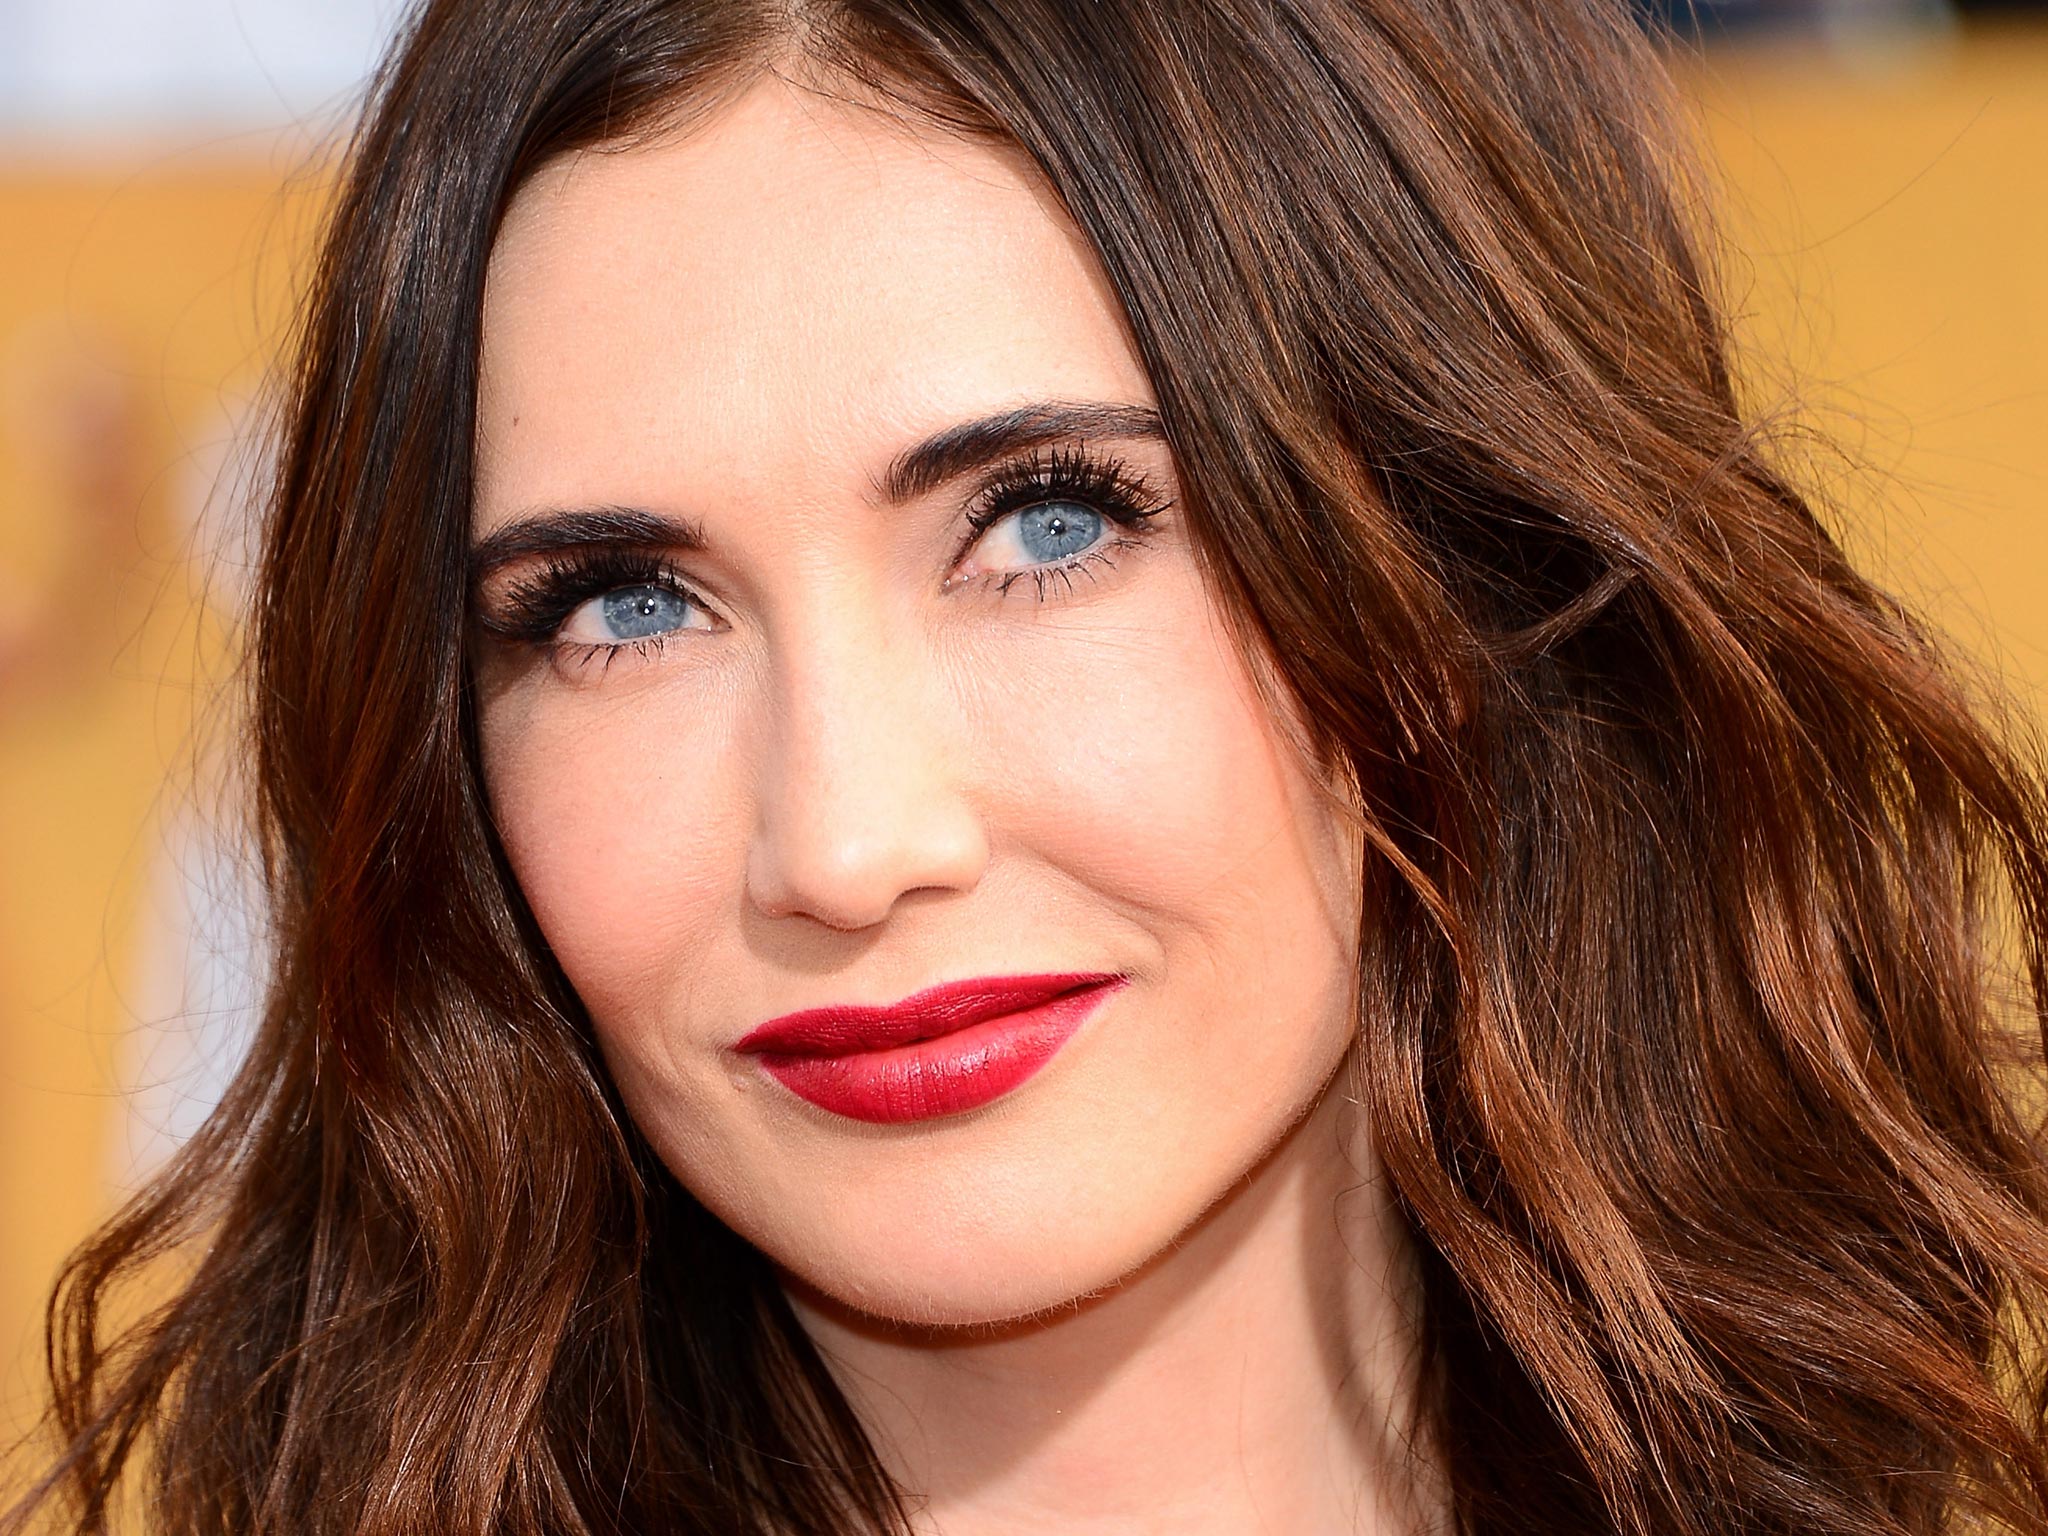 Carice van Houten who plays Red Priestess Melisandre says she has a novel way of approaching nude scenes on set